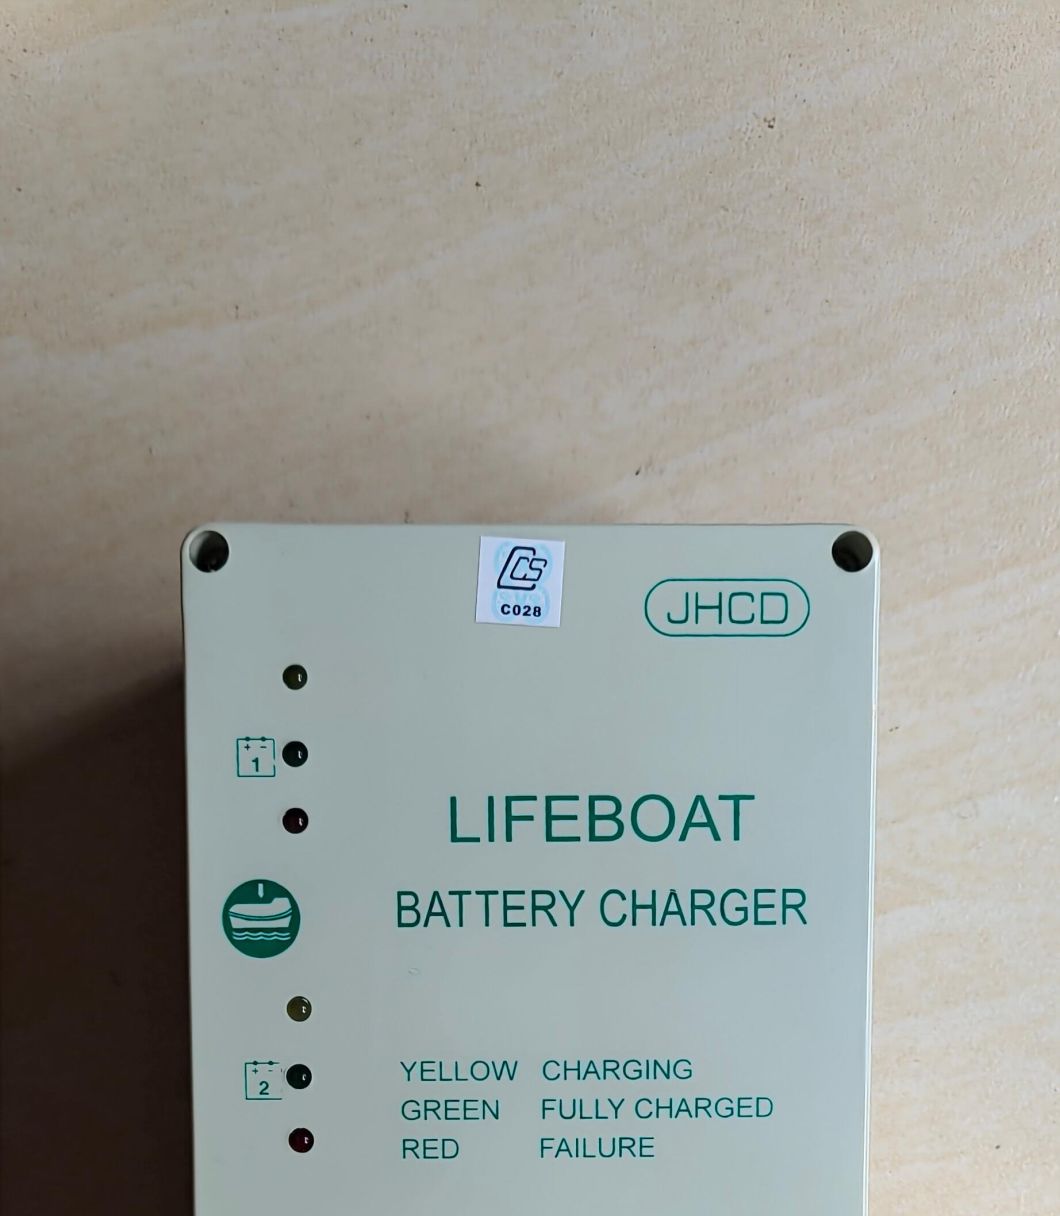 Quality Guarantee Eco-Friendly Professional Made Lifeboat Battery Chargers for Boats